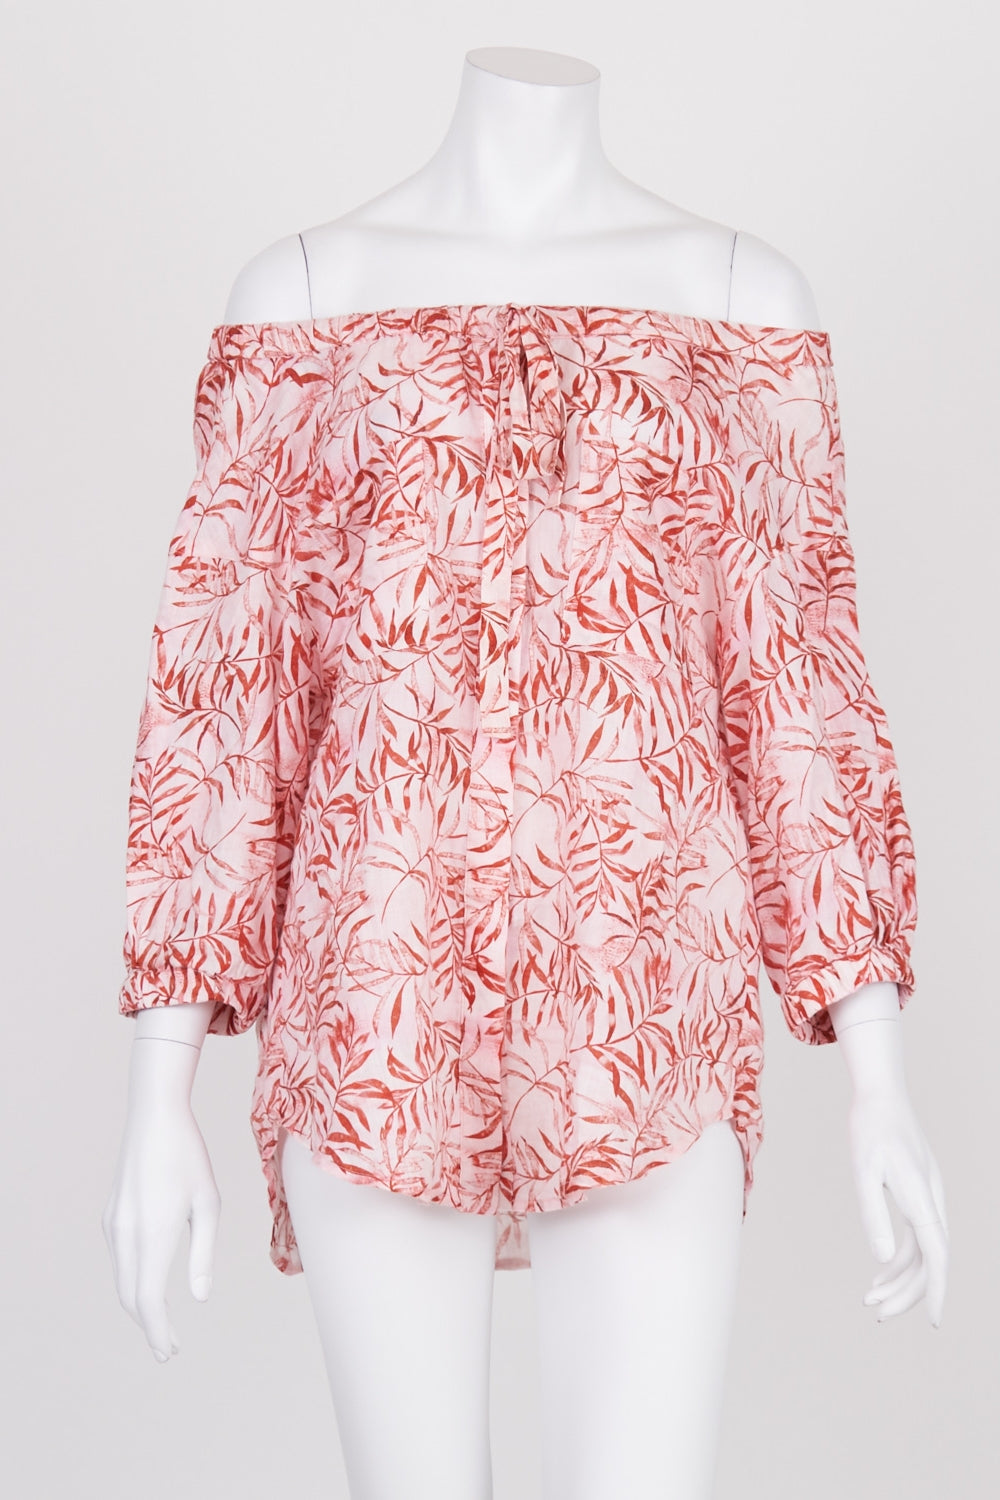 Sussan Pink Patterned 100% Linen Top 8 - 10